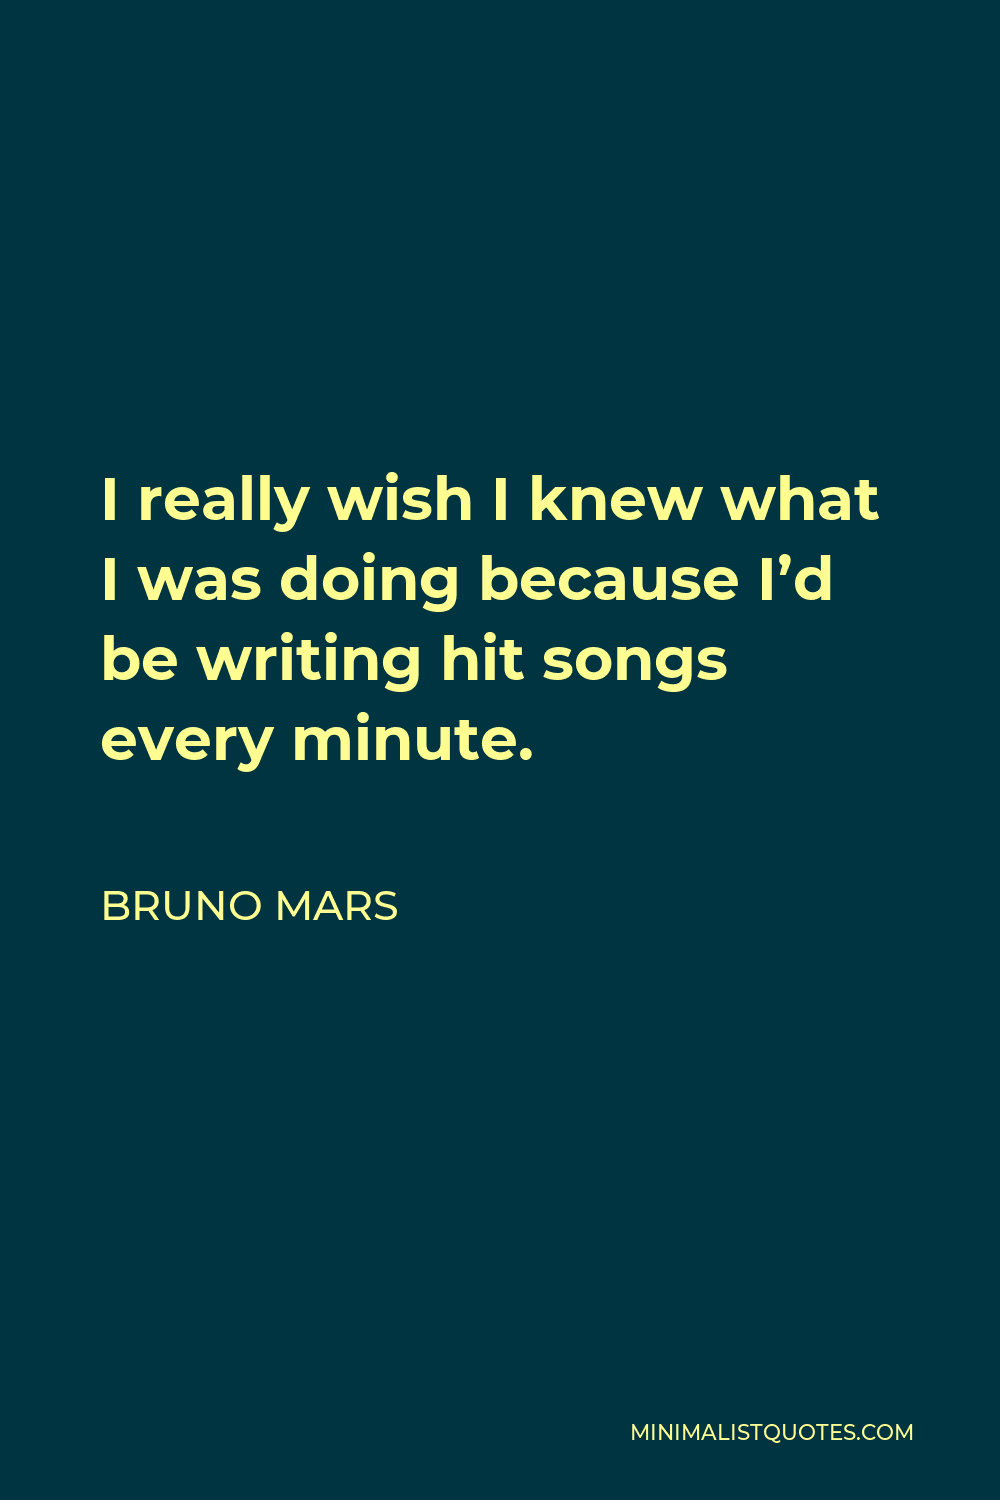 Bruno Mars Quote - I really wish I knew what I was doing because I’d be writing hit songs every minute.